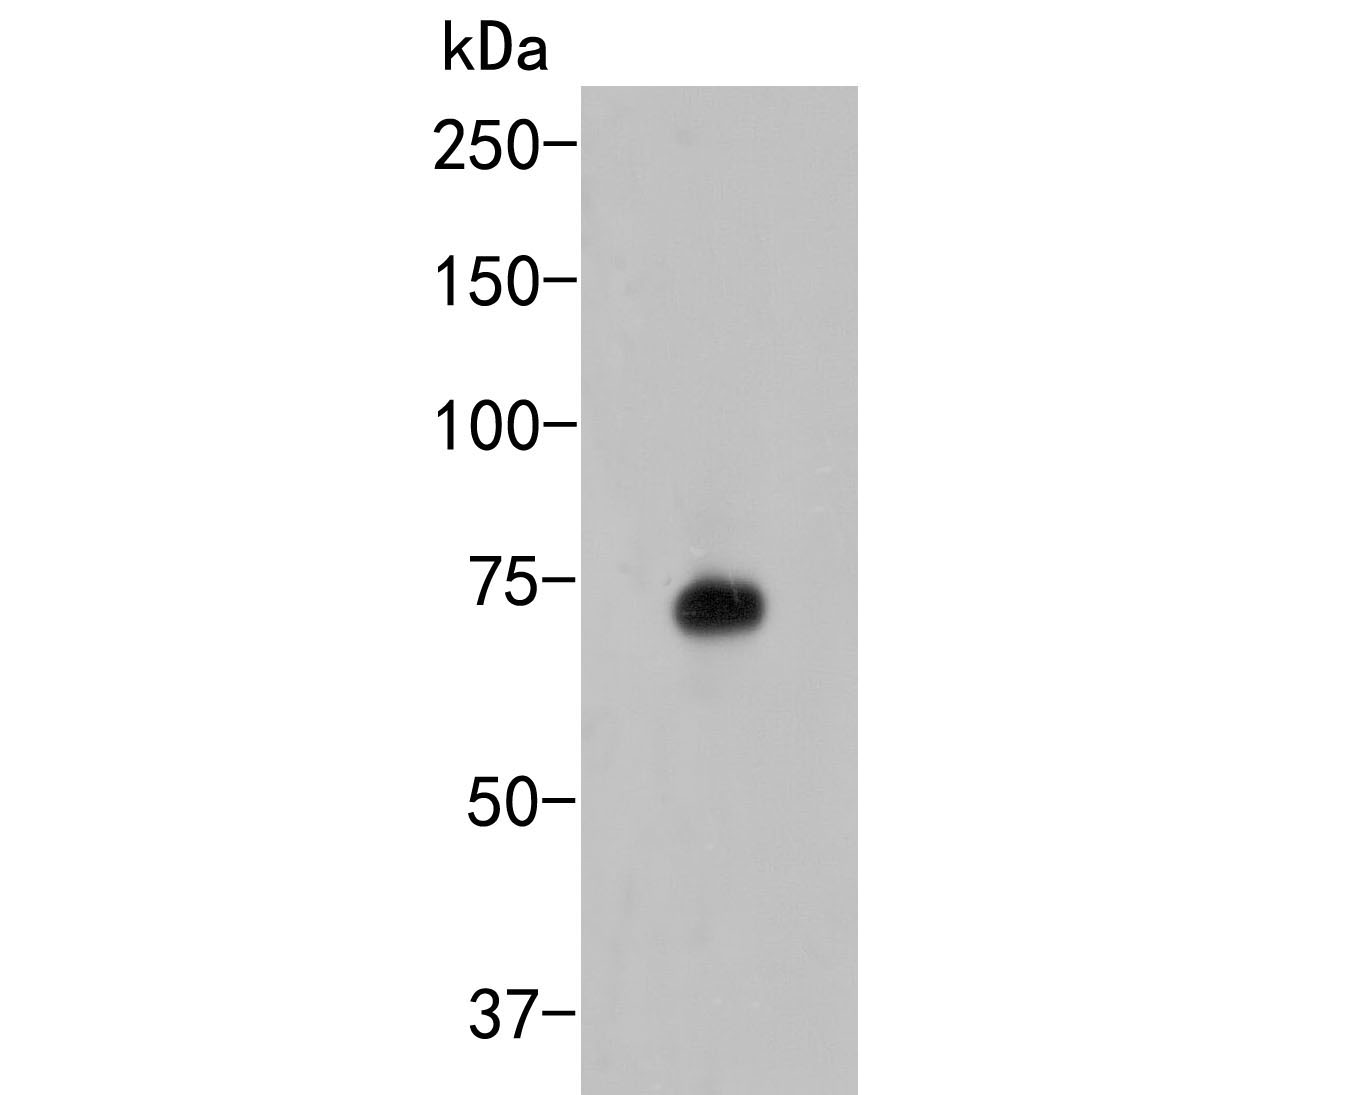 Western blot analysis of KCNQ4 on rat kidney tissue lysate. Proteins were transferred to a PVDF membrane and blocked with 5% BSA in PBS for 1 hour at room temperature. The primary antibody (ER2001-23, 1/500) was used in 5% BSA at room temperature for 2 hours. Goat Anti-Rabbit IgG - HRP Secondary Antibody (HA1001) at 1:5,000 dilution was used for 1 hour at room temperature.